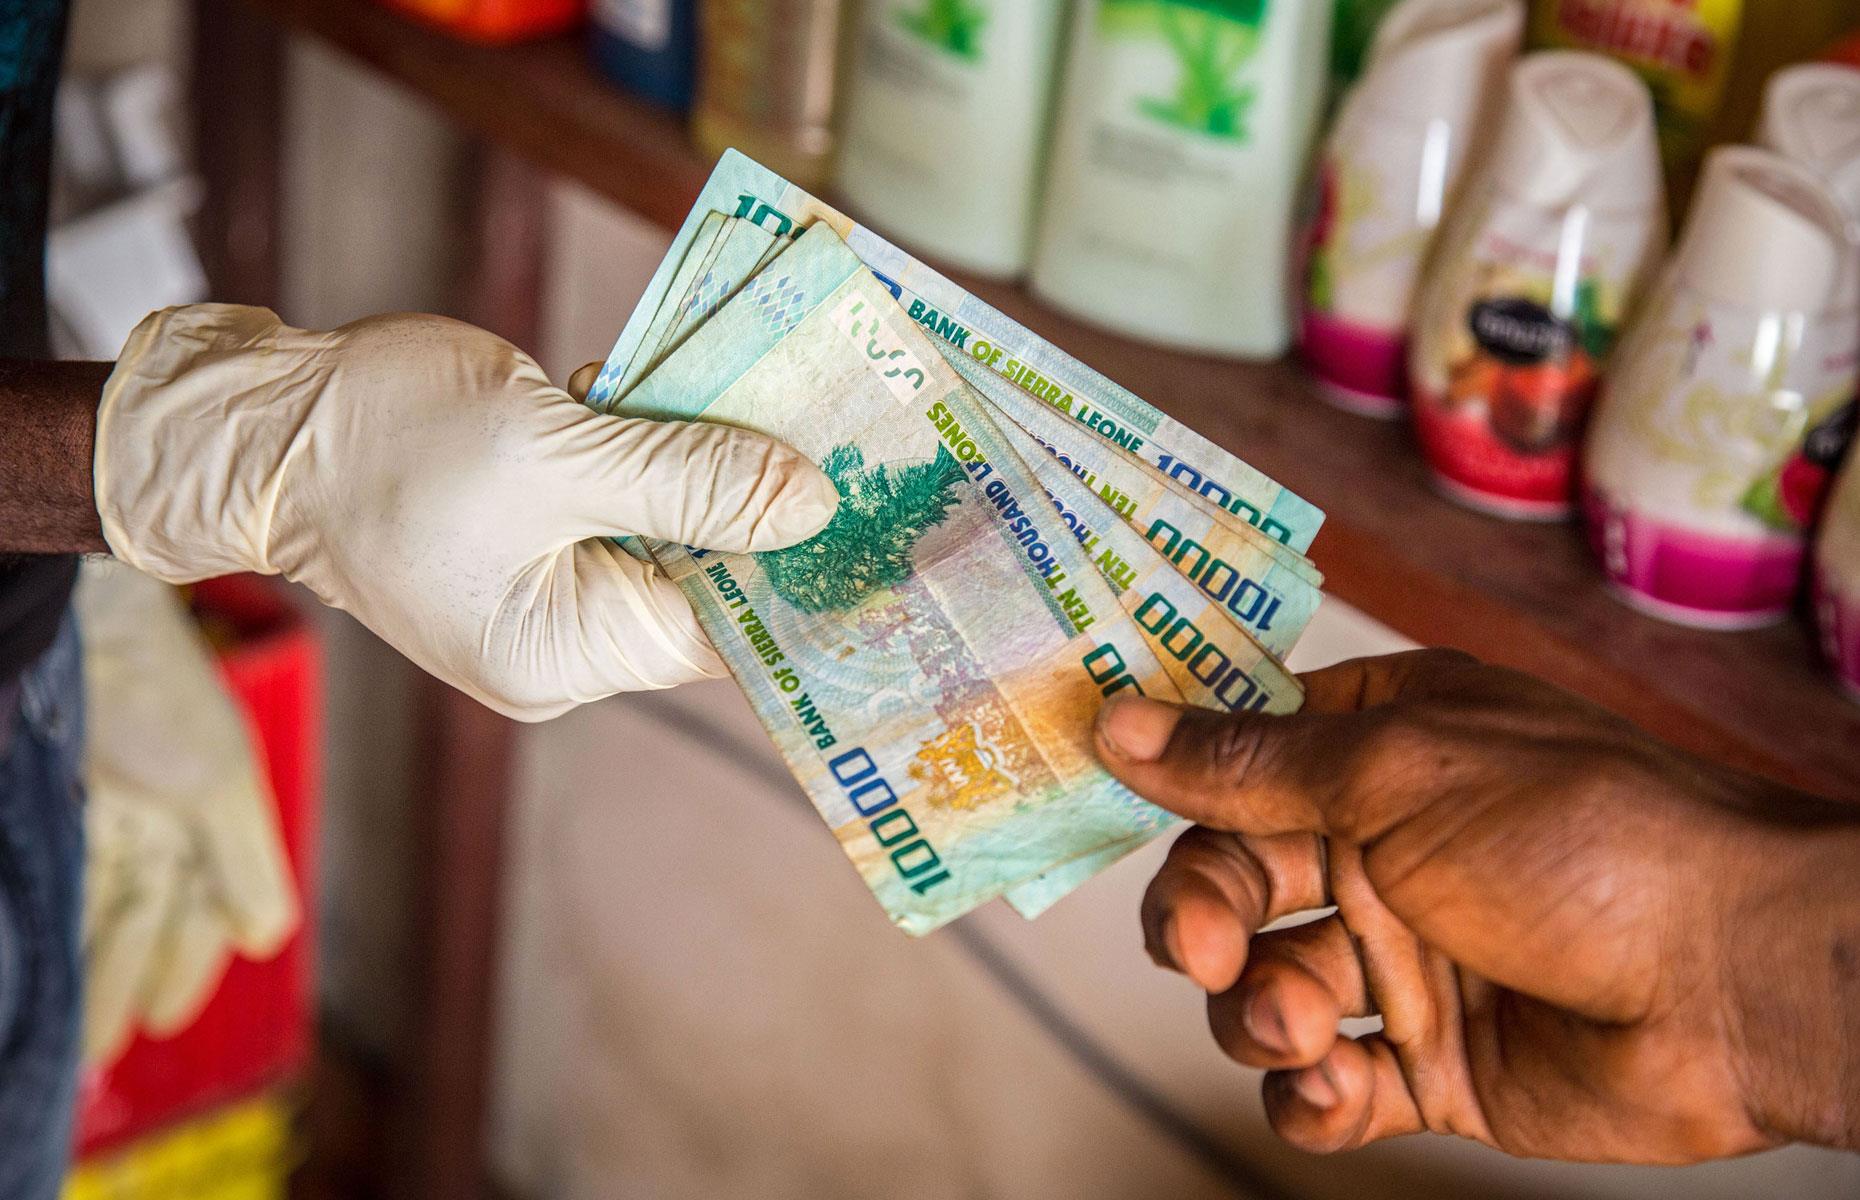 The ebola virus can survive on a banknote for up to 30 days